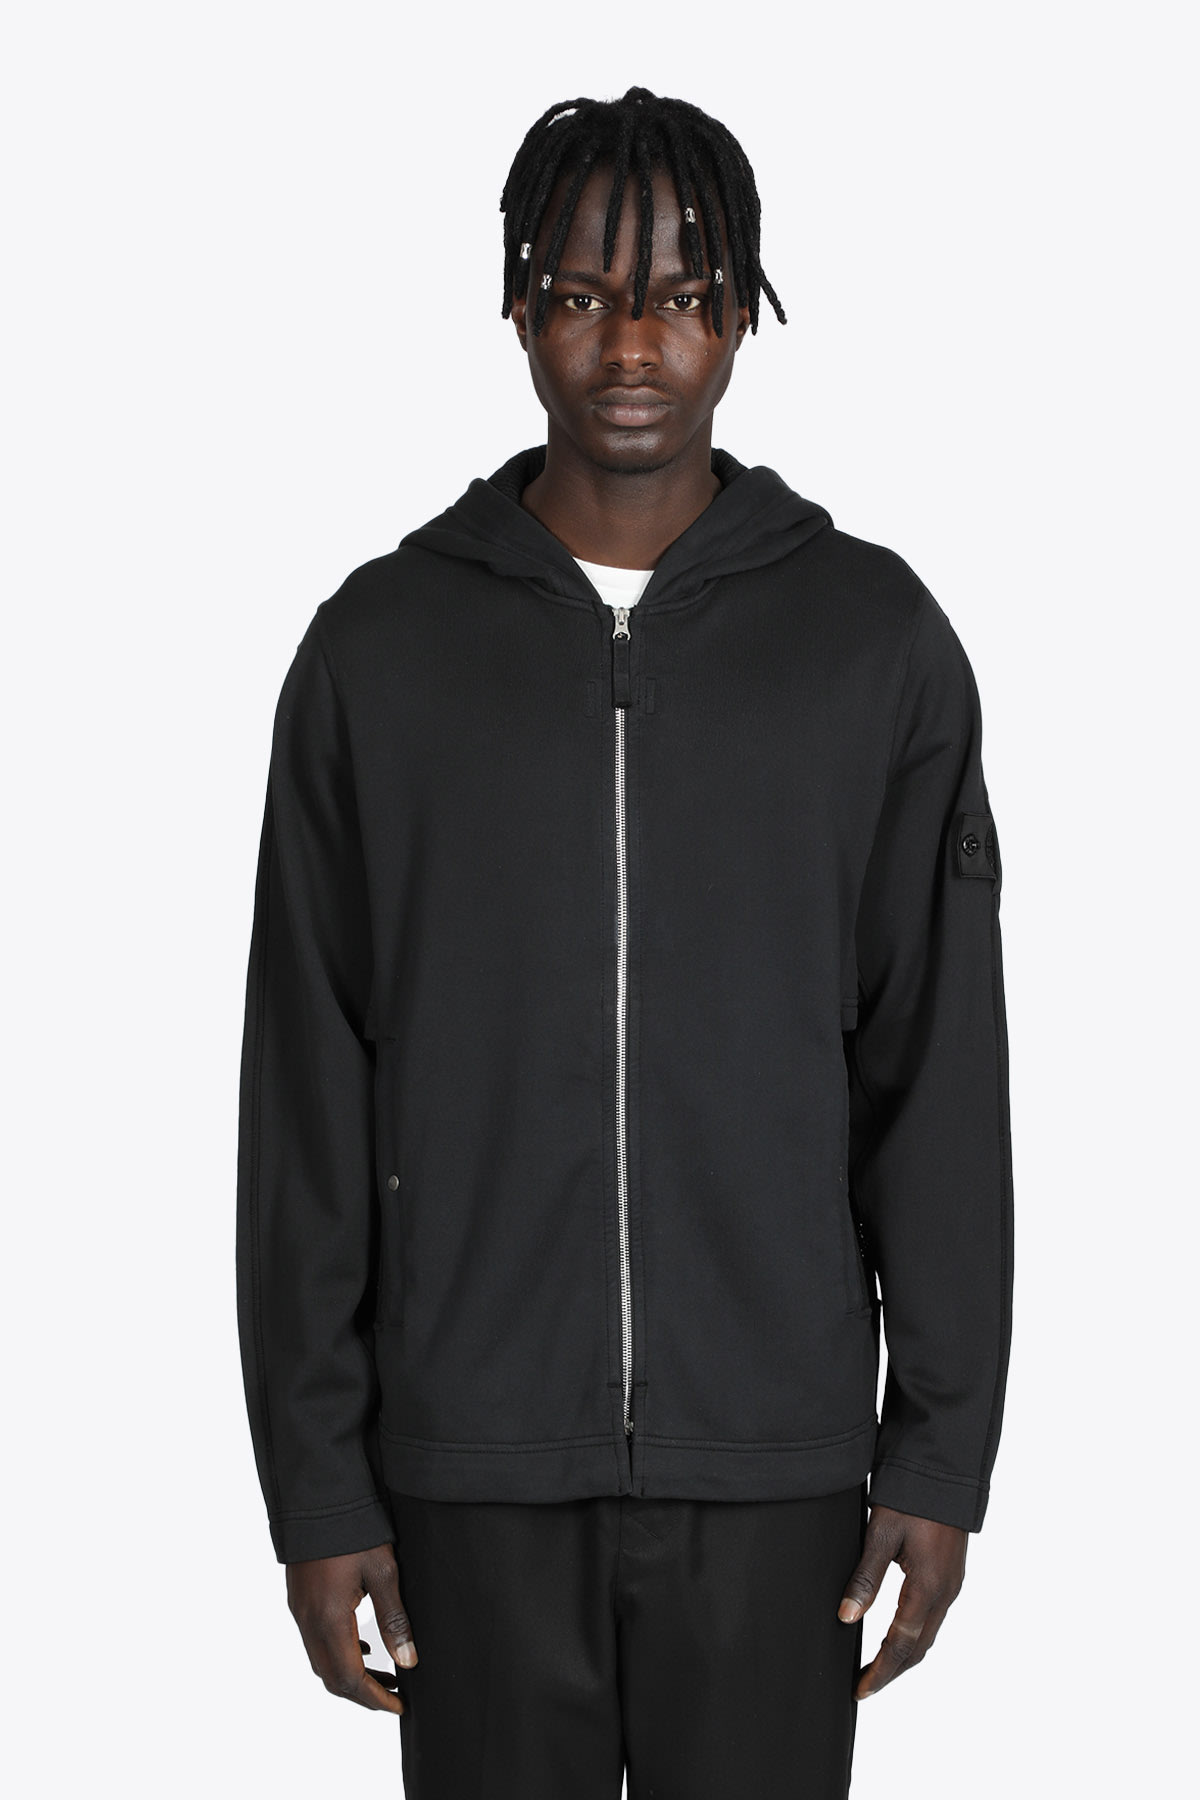 Stone Island Shadow Project Full Zip Hoodie Chapter 1 Black cotton full zip hoodie with mesh panel